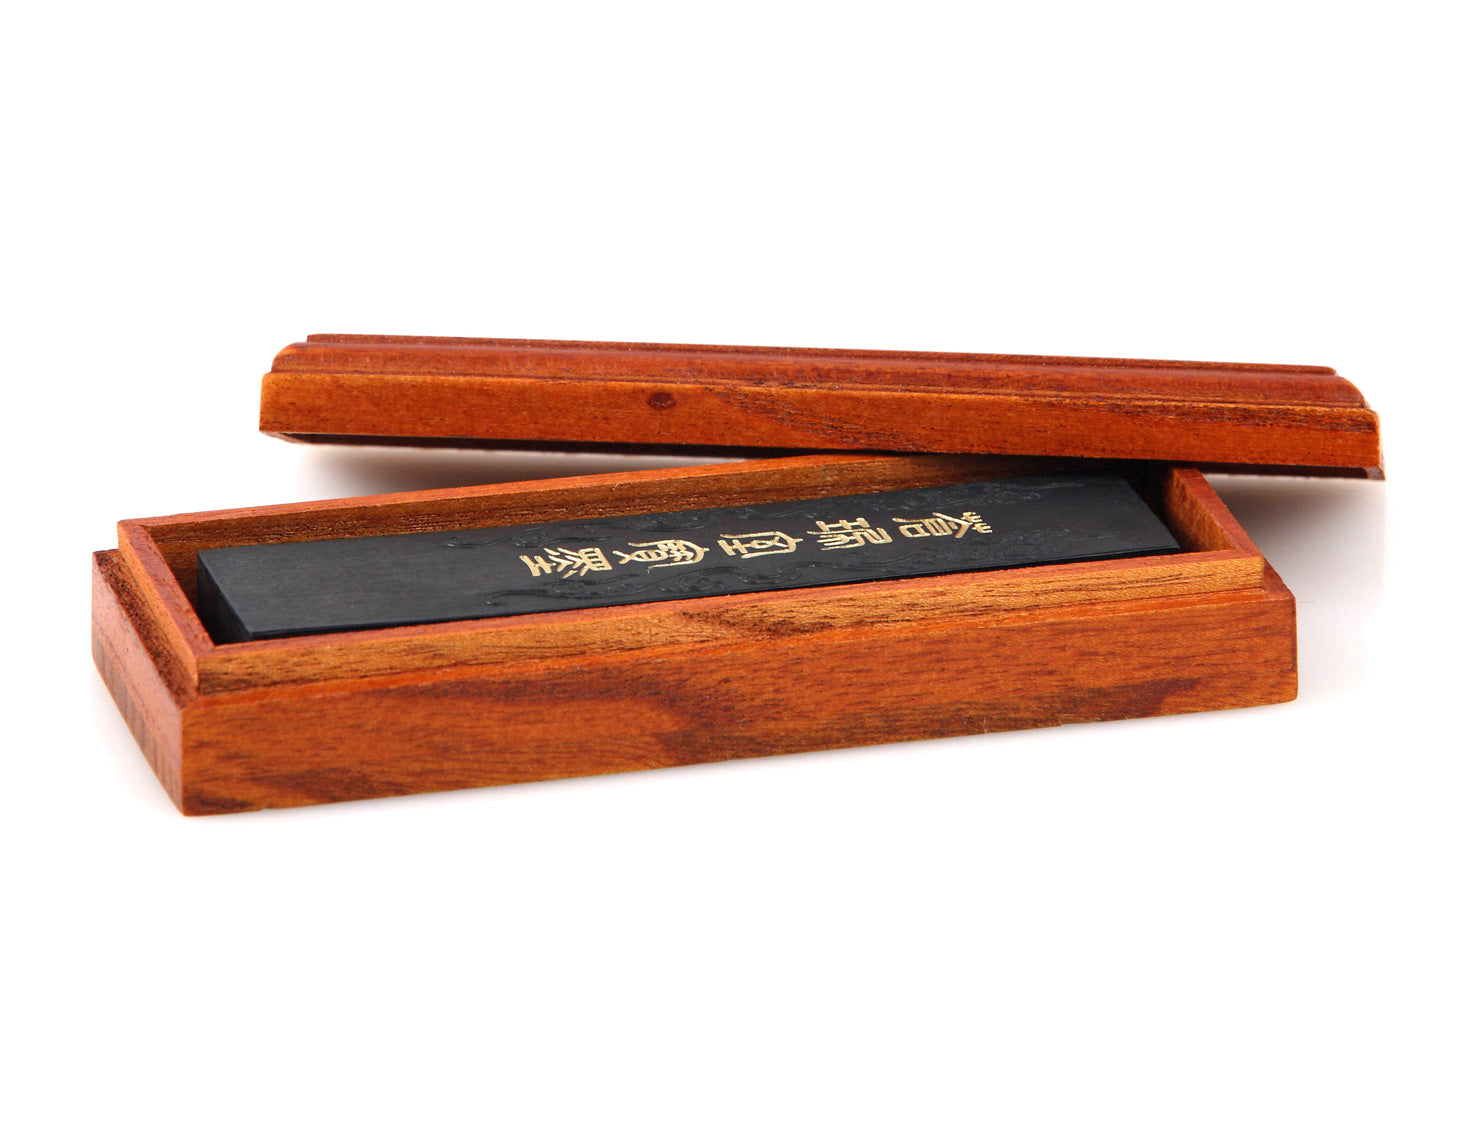 Premium quality, hand made Chinese calligraphy and sumi ink stick with golden lettering and decorative carvings